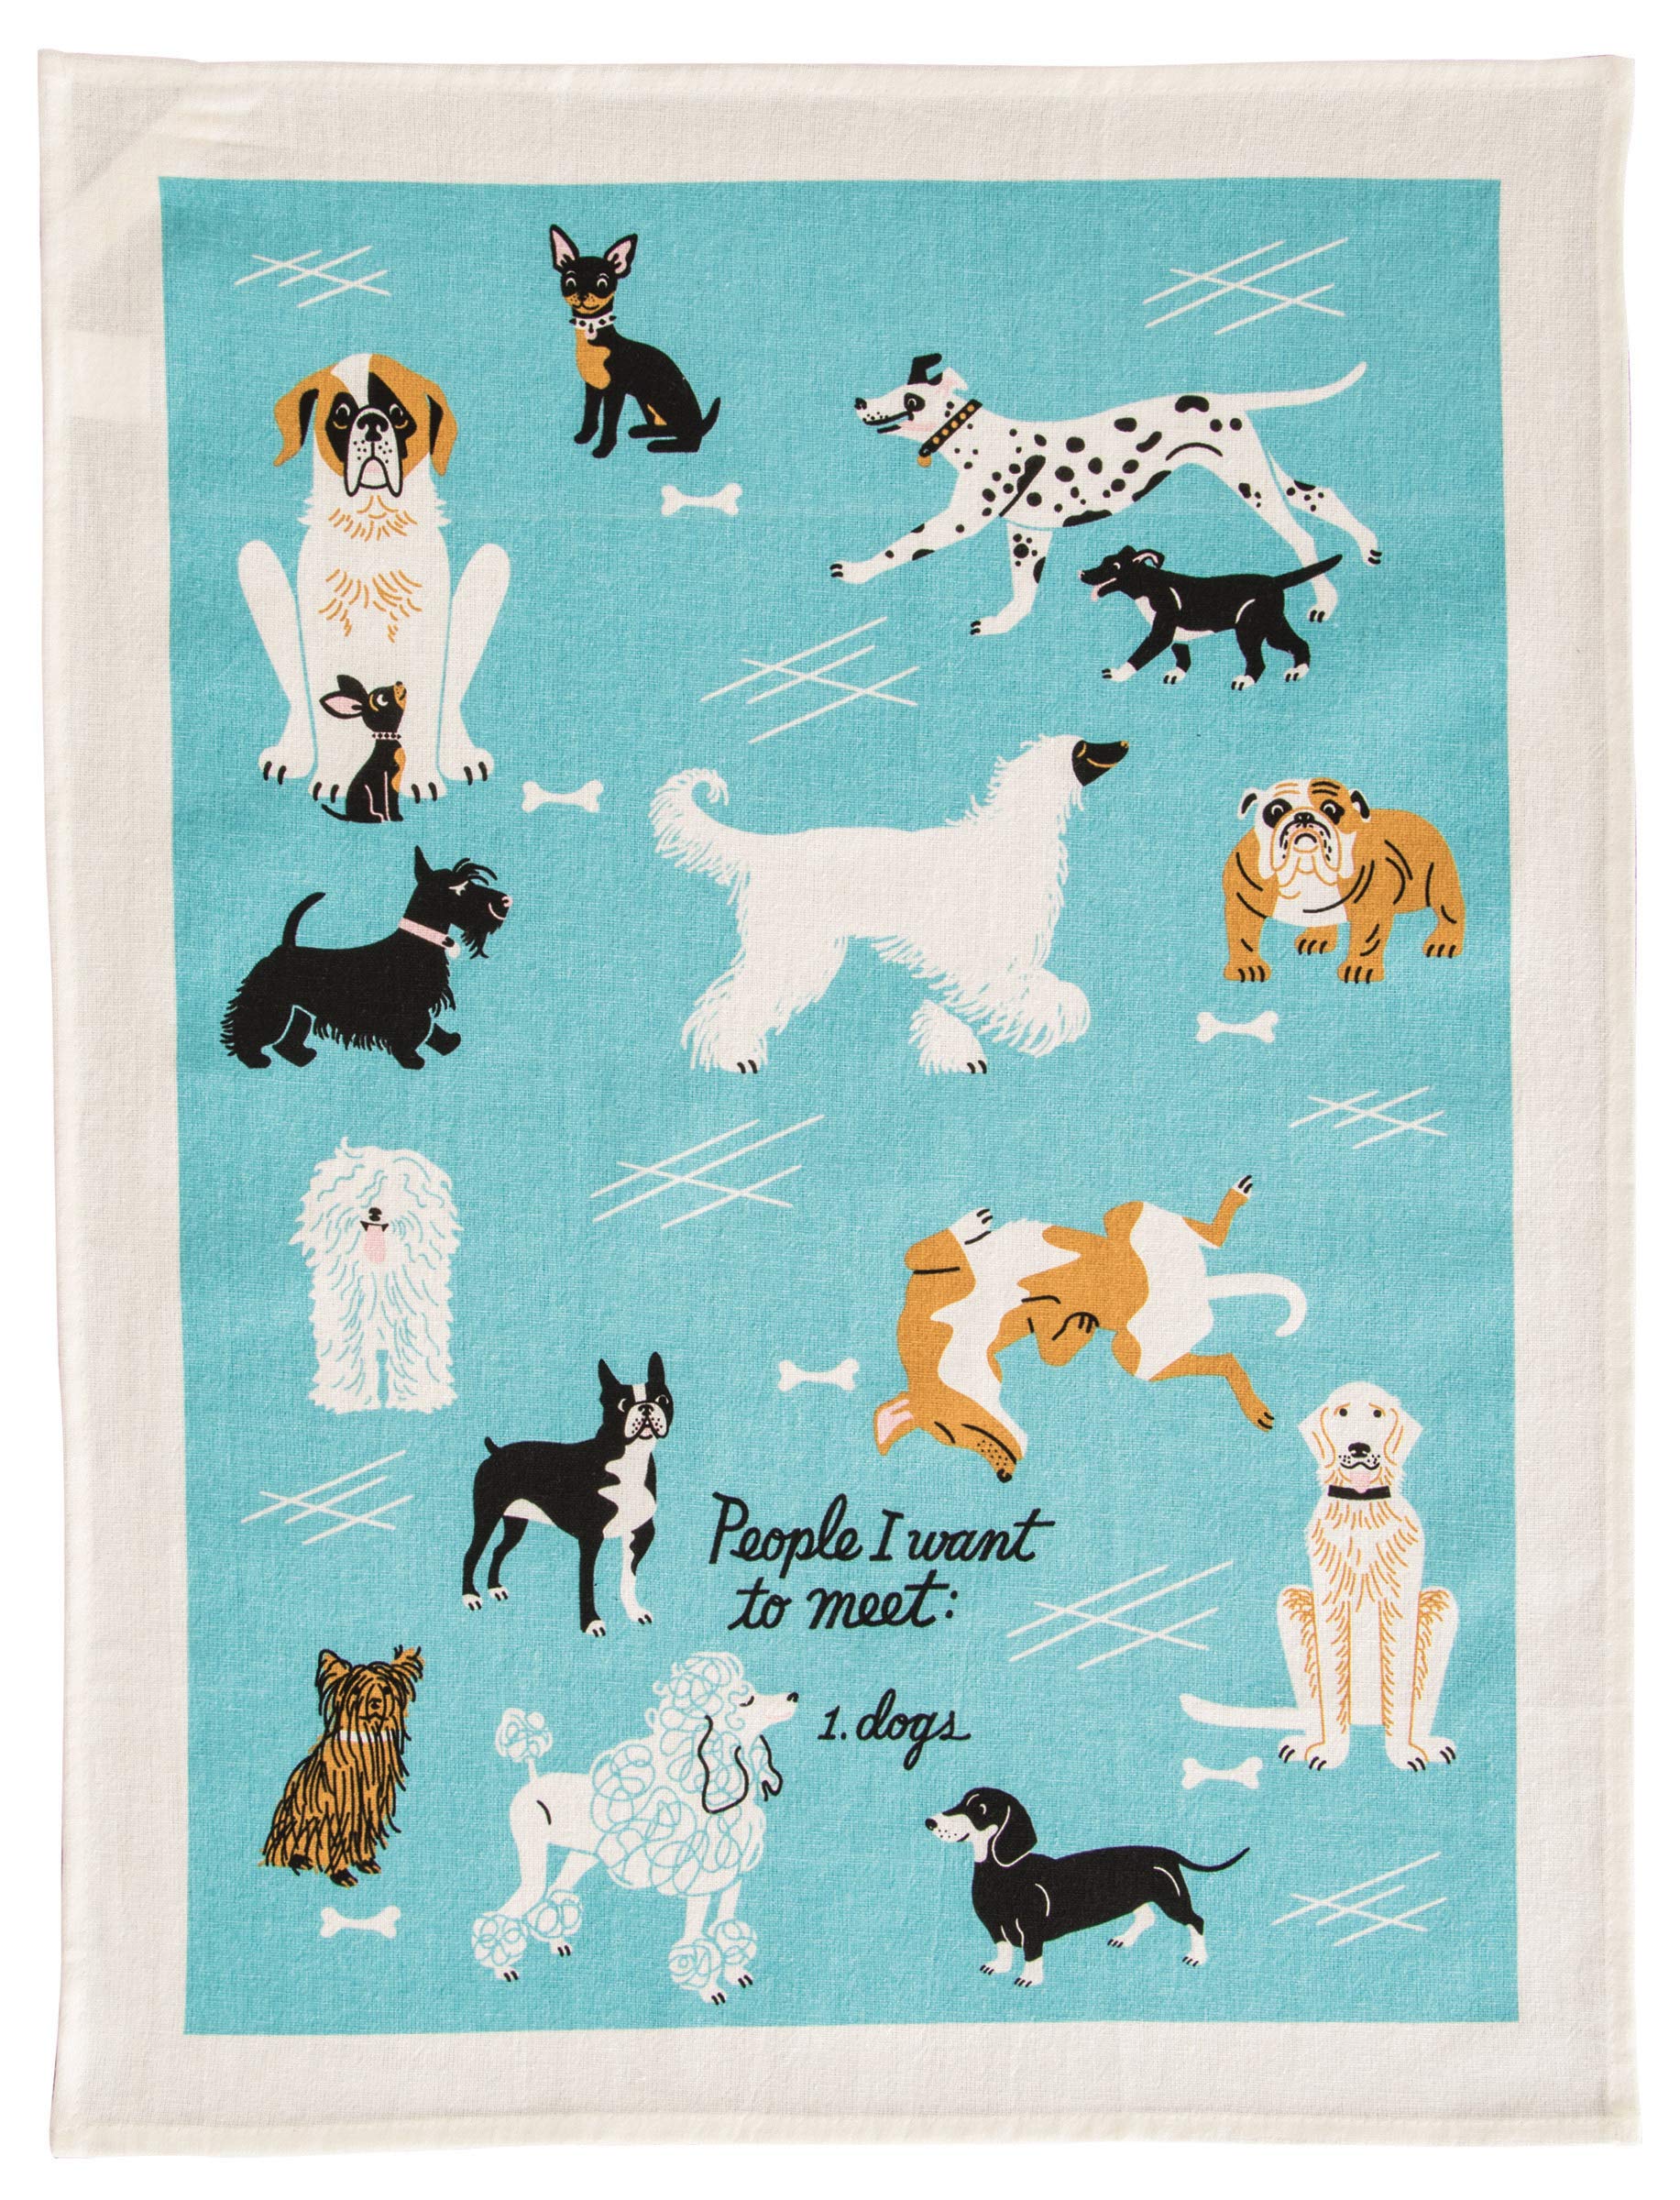 Blue Q Funny Dish Towel, People I Want to Meet: Dogs! 100% Cotton, Screen-Printed in Rich Vibrant Colors. 28" x 21". 1EA